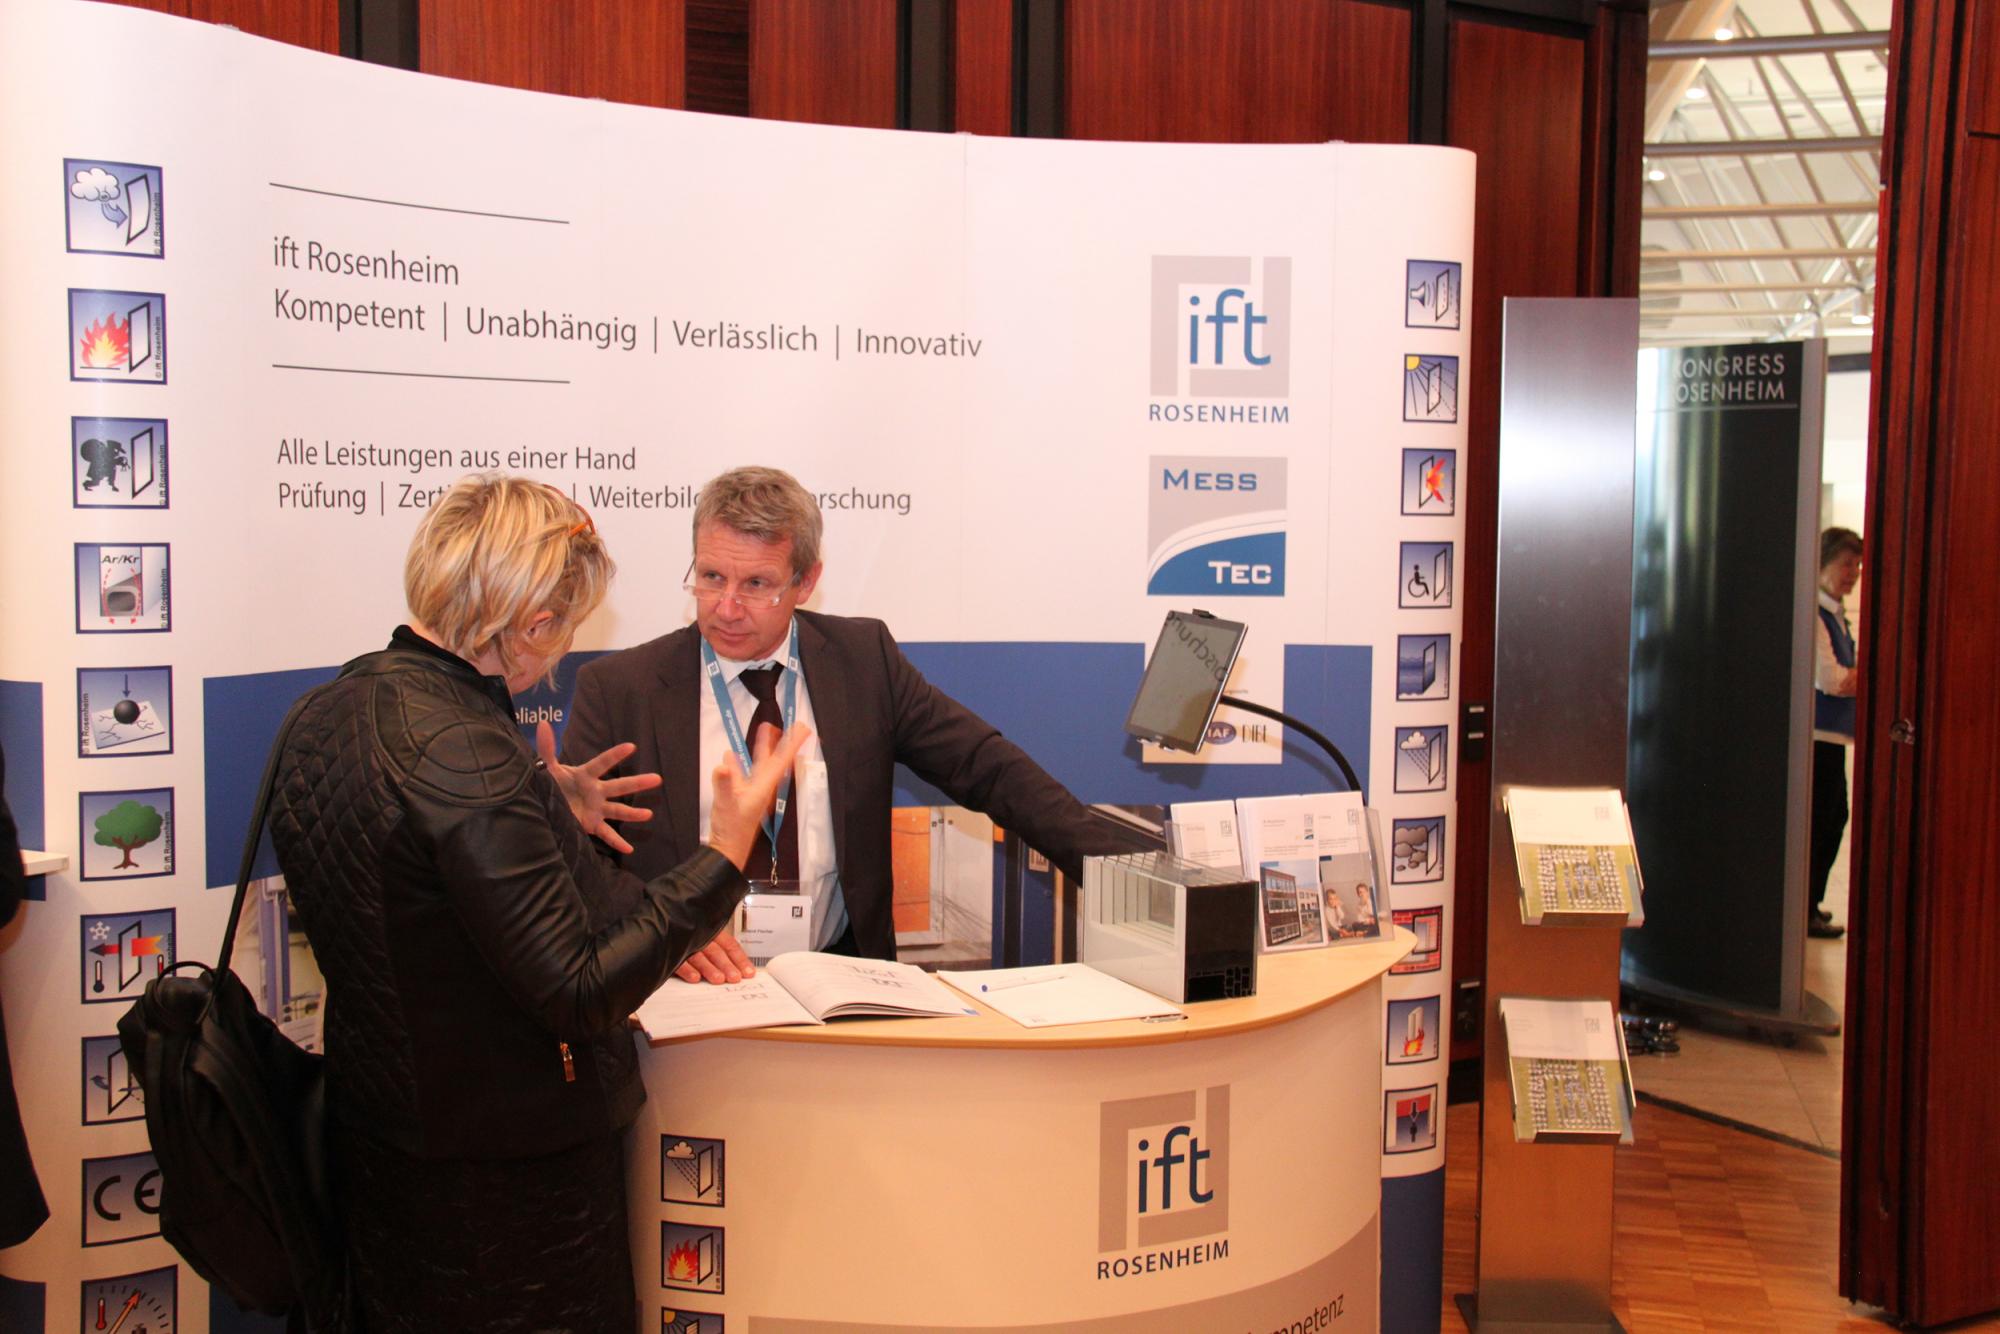      Roland Fischer "in dialogue" with customers at the new ift Trade Fair stand including ift experts that can be reserved by ift customers flexibly for events. (Source: ift Rosenheim) 